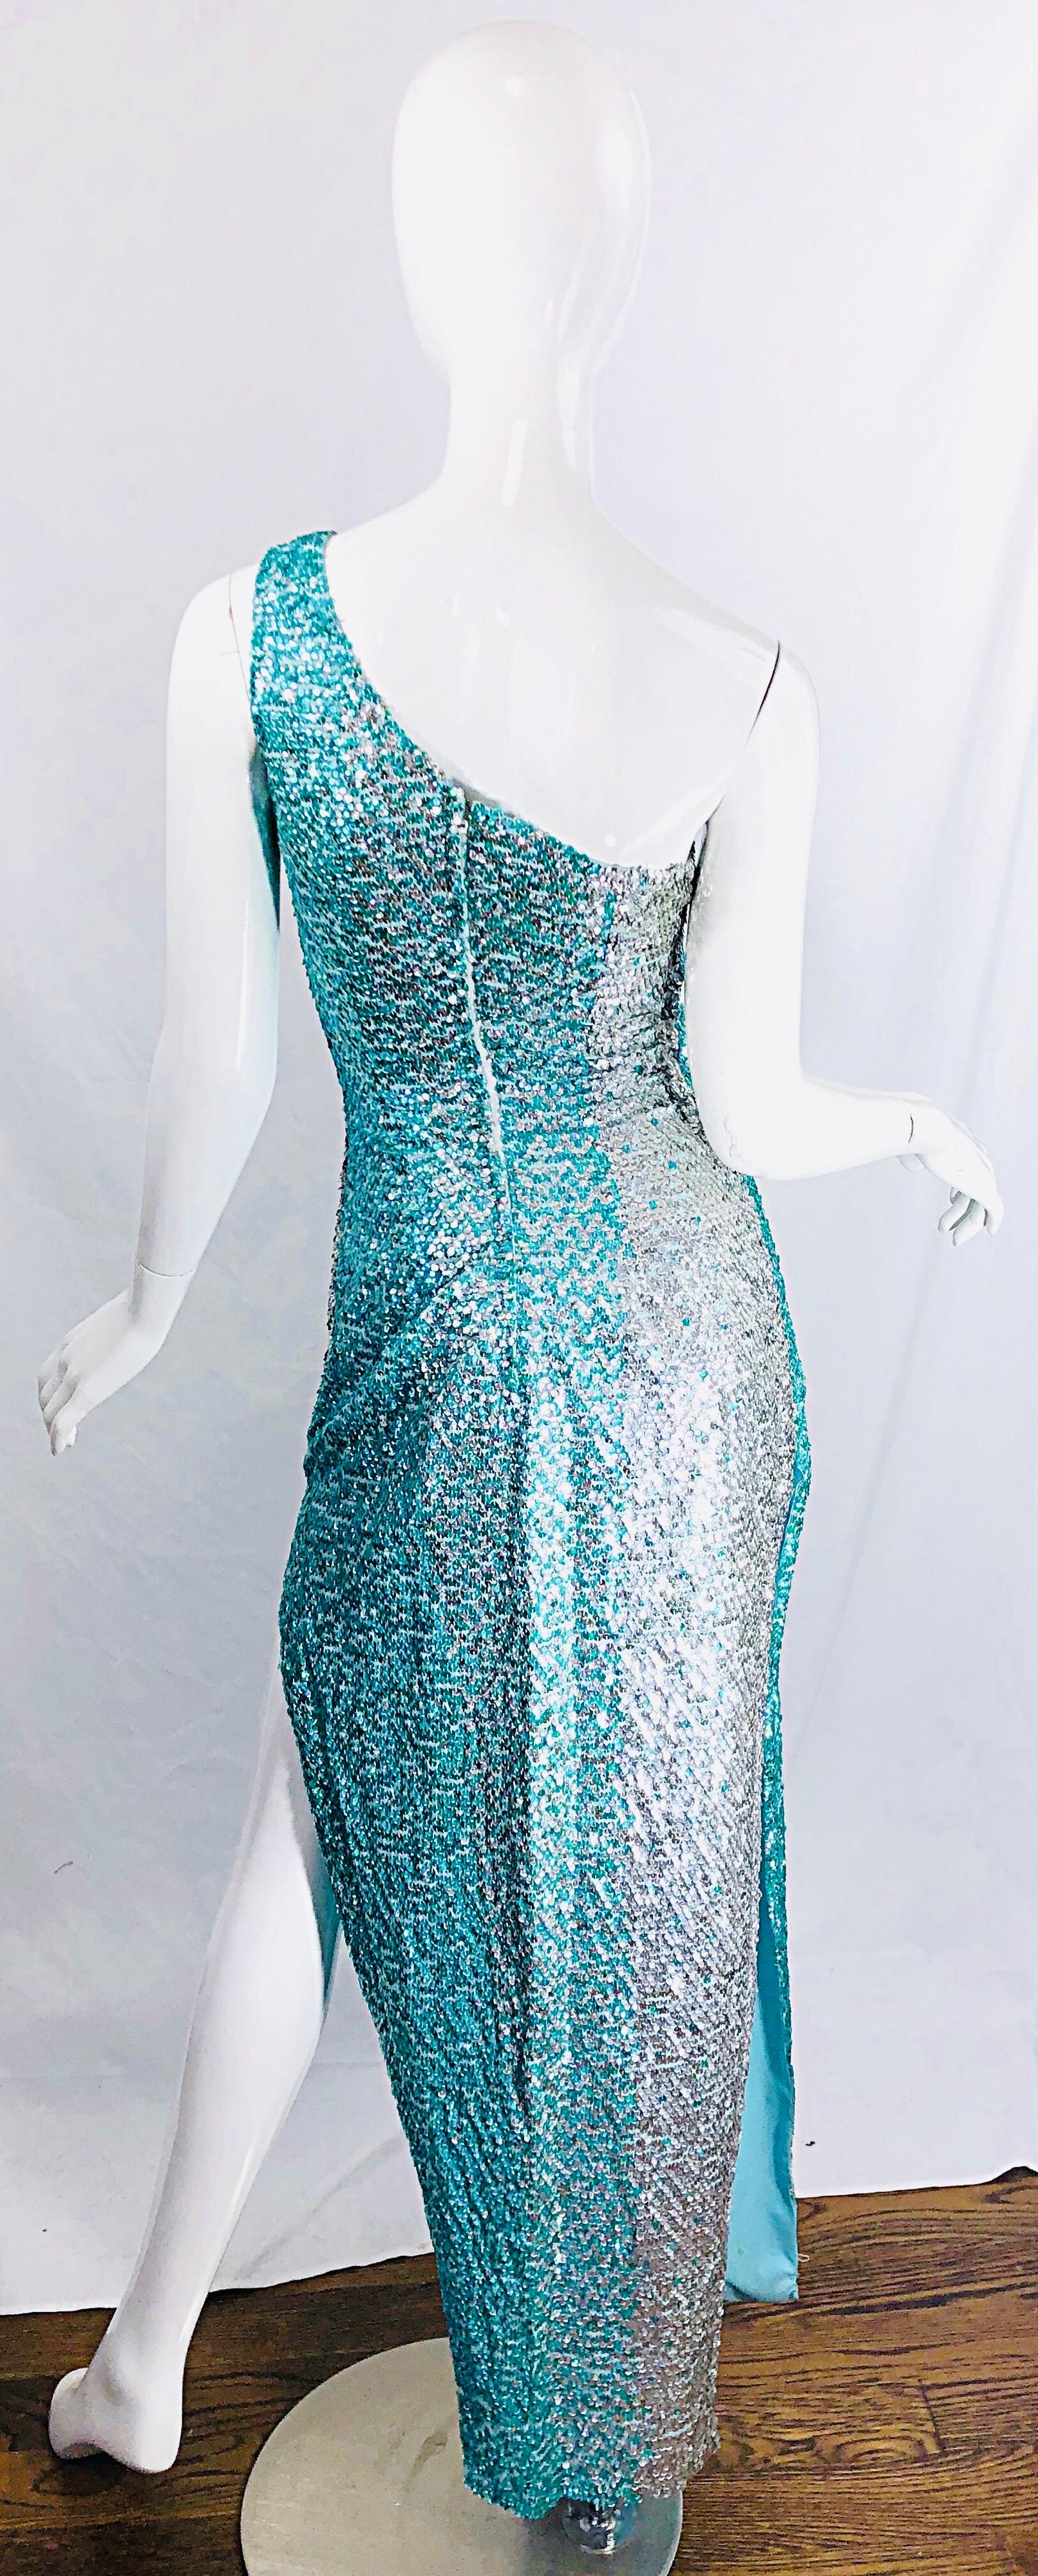 1970s Fully Sequined One Shoulder Sexy Ombre Aqua Silver Vintage 70s Gown Dress For Sale 7